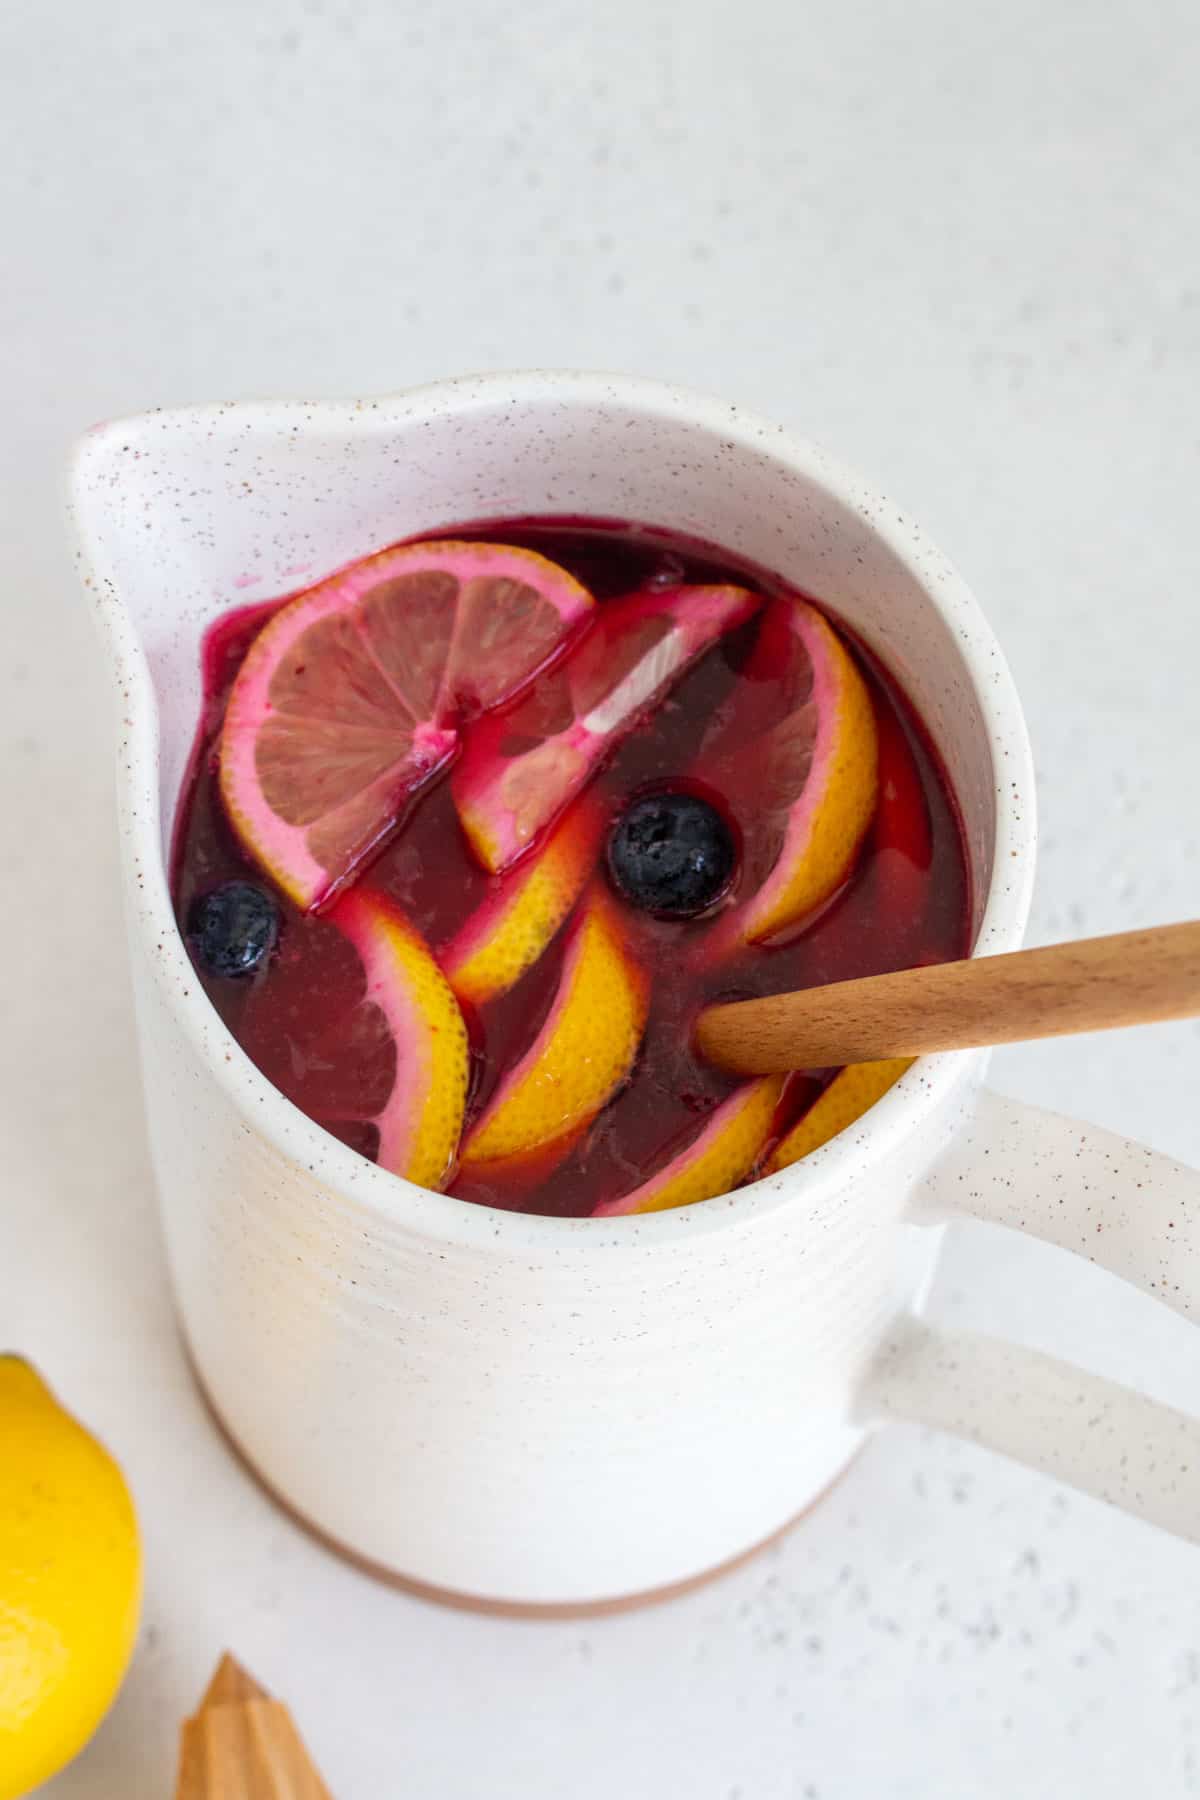 An angled view of a pitcher of blueberry lemonade with a wooden spoon inside.